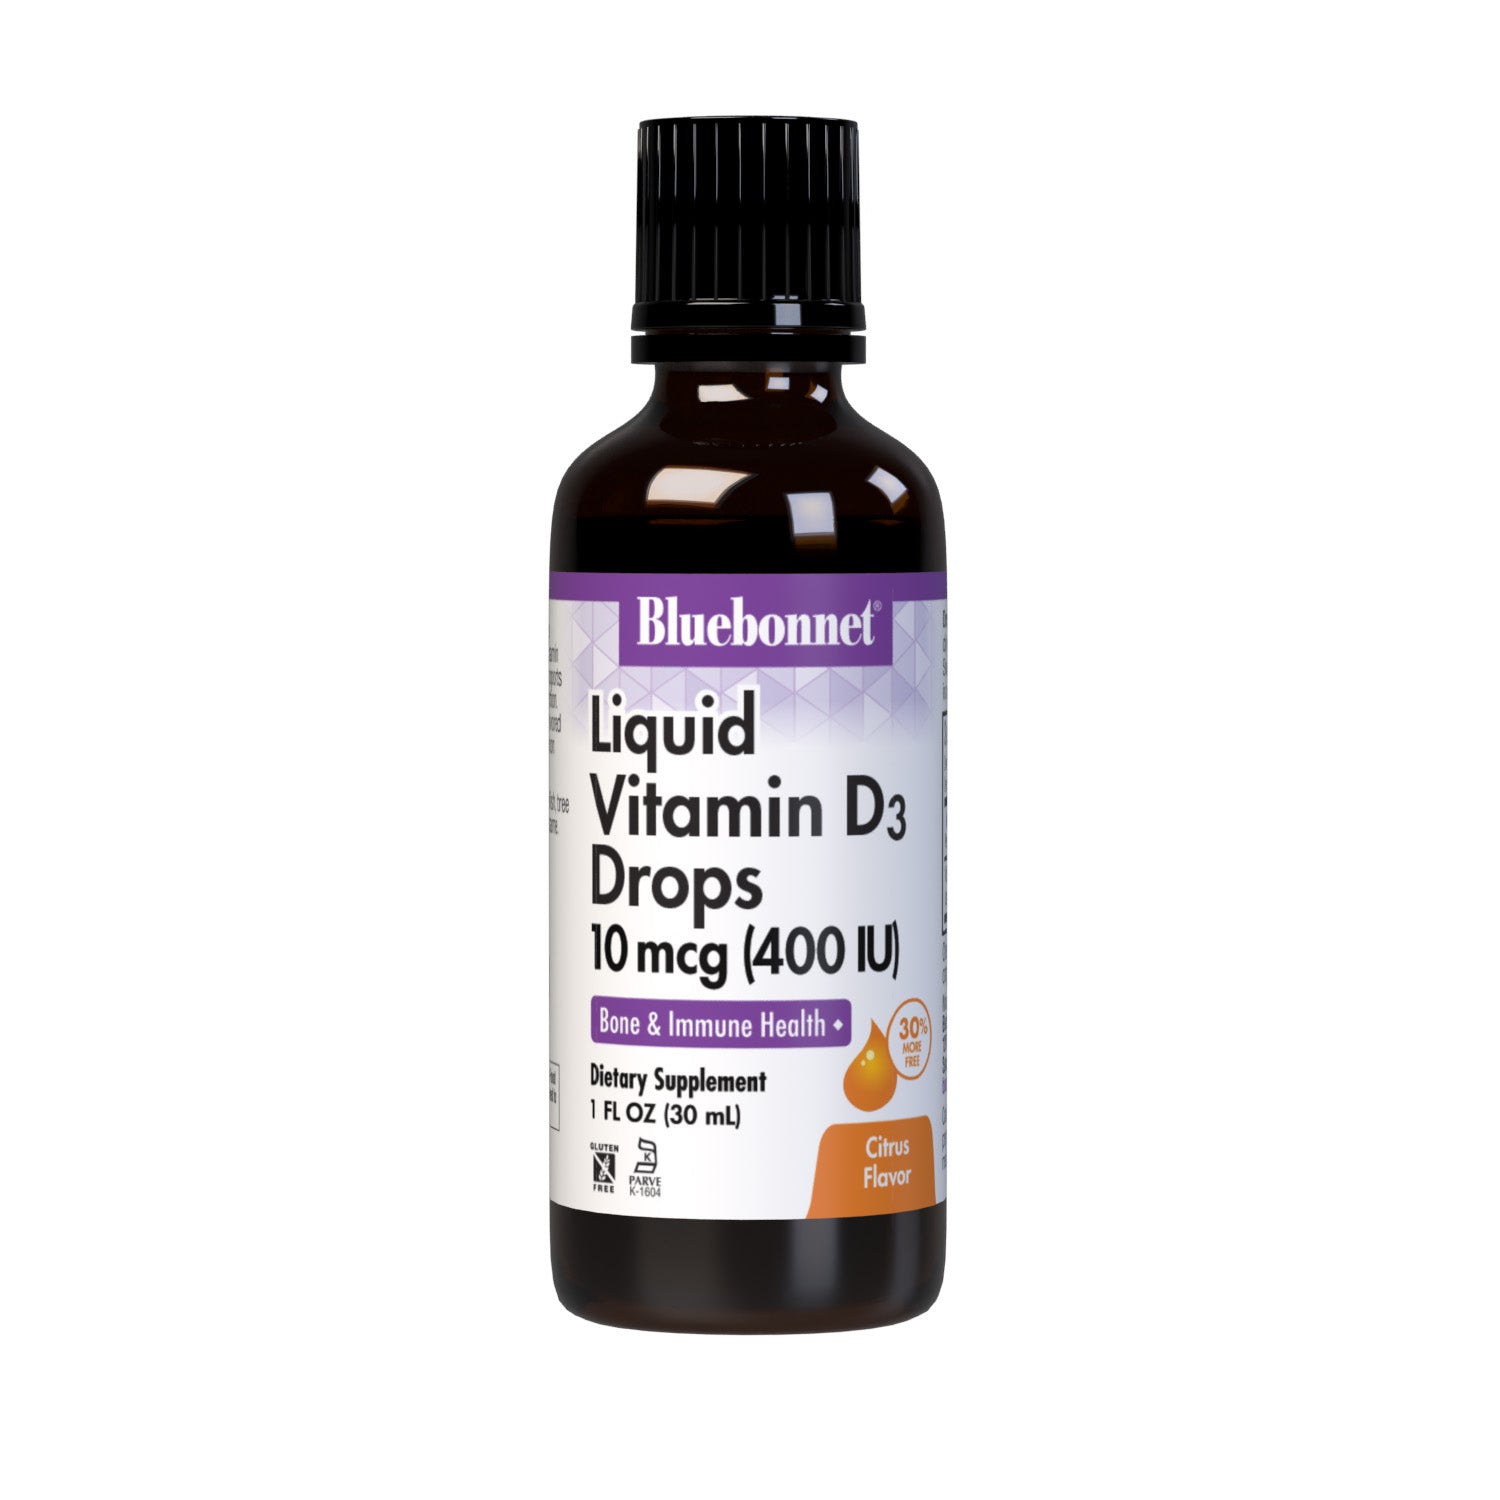 Bluebonnet’s Liquid Vitamin D3 Drops 400 IU (10 mcg) are formulated with vitamin D3 (cholecalciferol) from lanolin for strong healthy bones. Each drop of this sunshine vitamin is flavored using a hint of orange and lemon essential oils.  #size_1 fl oz